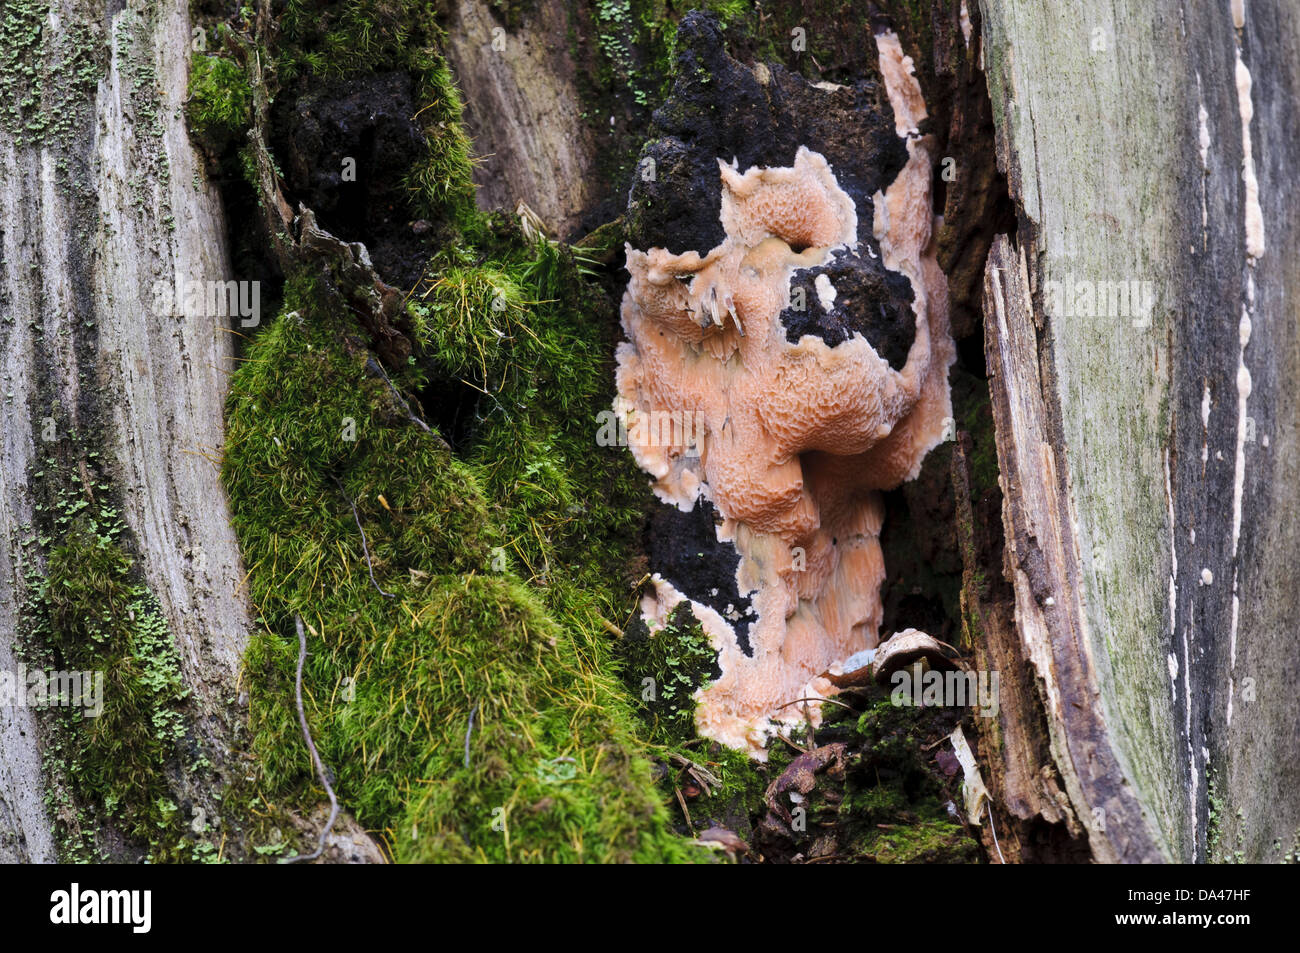 Brown-rot (Postia placenta) growing over decaying tree stump, Clumber Park, Nottinghamshire, England, October Stock Photo